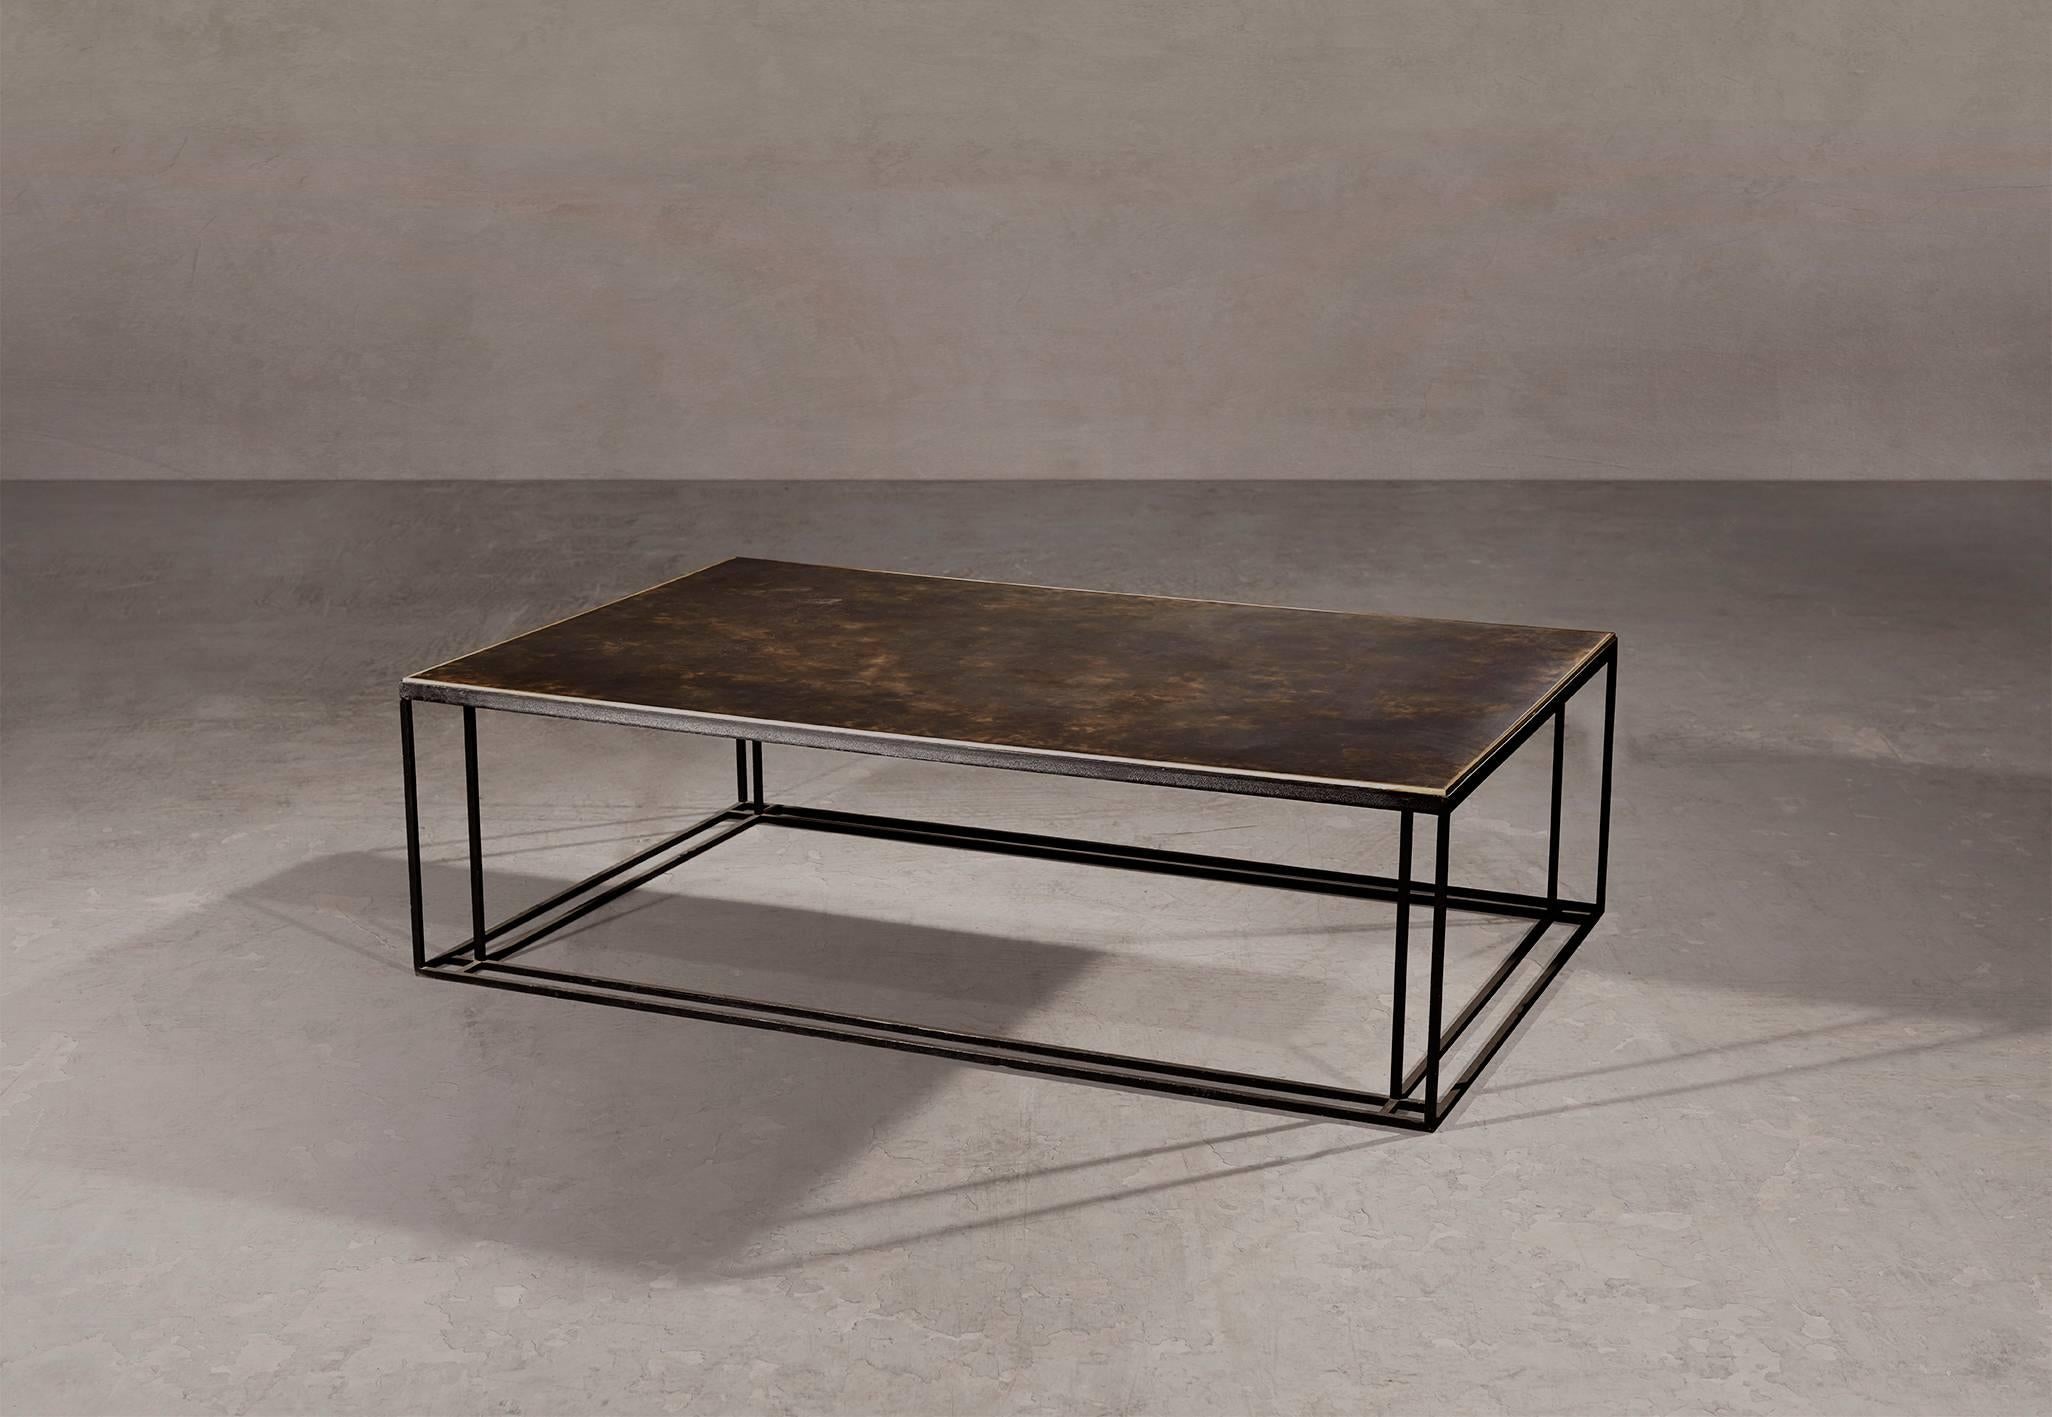 A coffee table in blackened steel and patinated brass, with a polished brass trim. Hand crafted to order in the North. Bespoke finishes and sizes are available.

Measures: 120cm width x 80cm depth x 35cm height.
Custom finishes and sizes